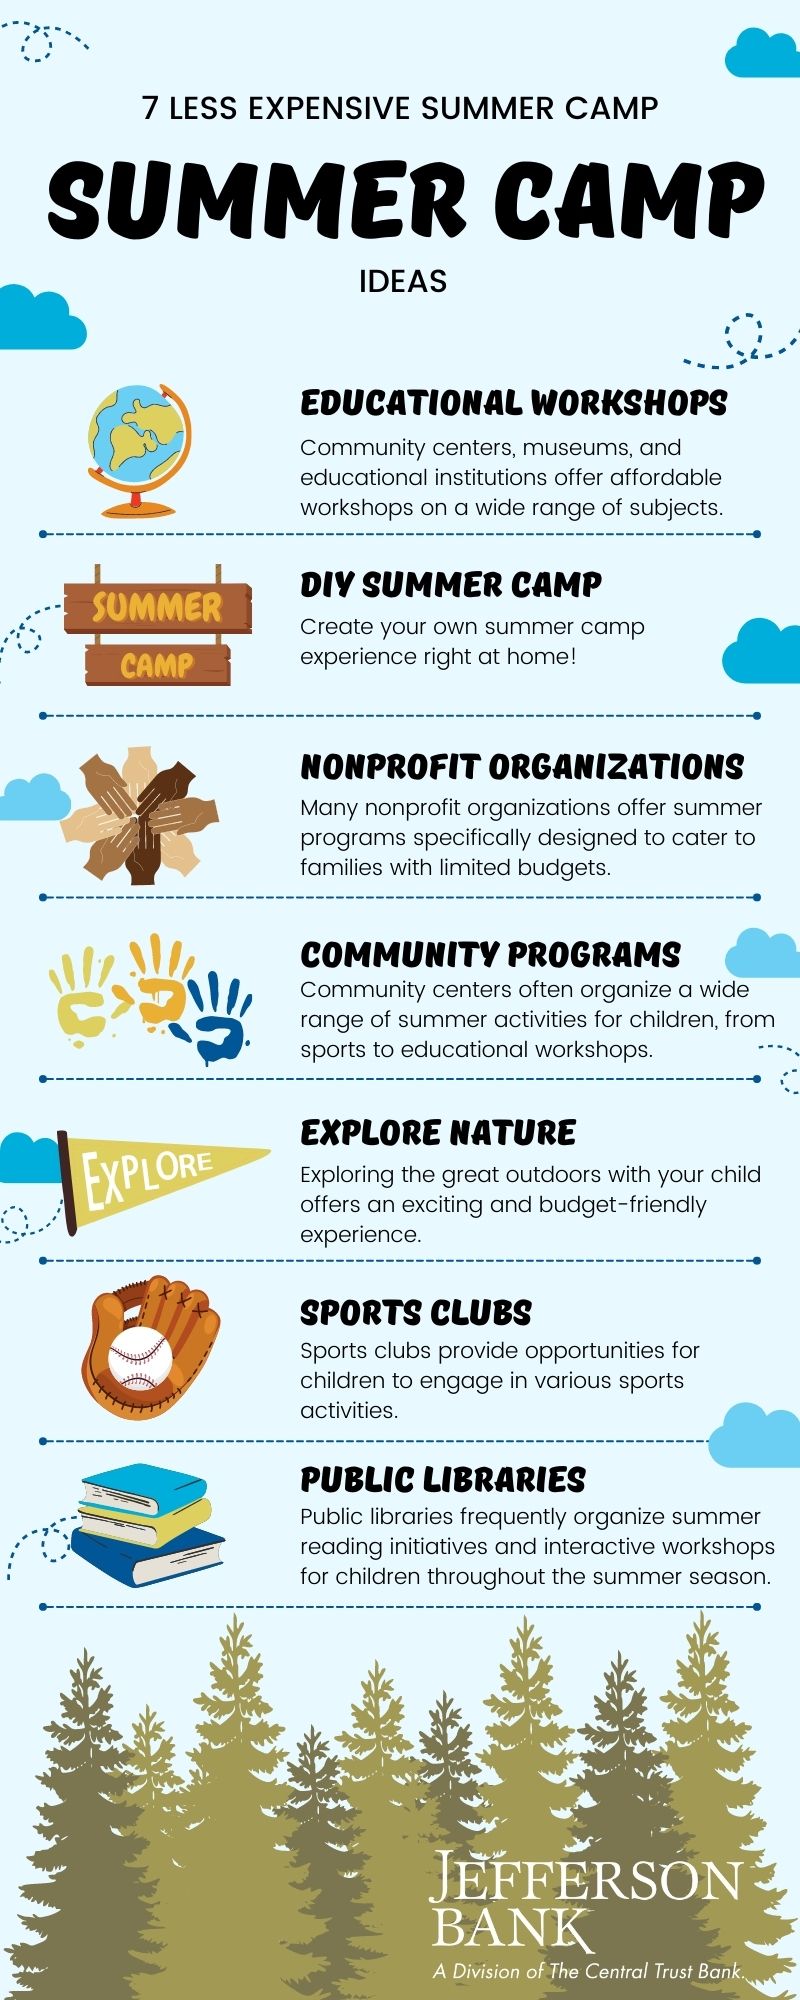 7 less expensive summer camp ideas Infographic